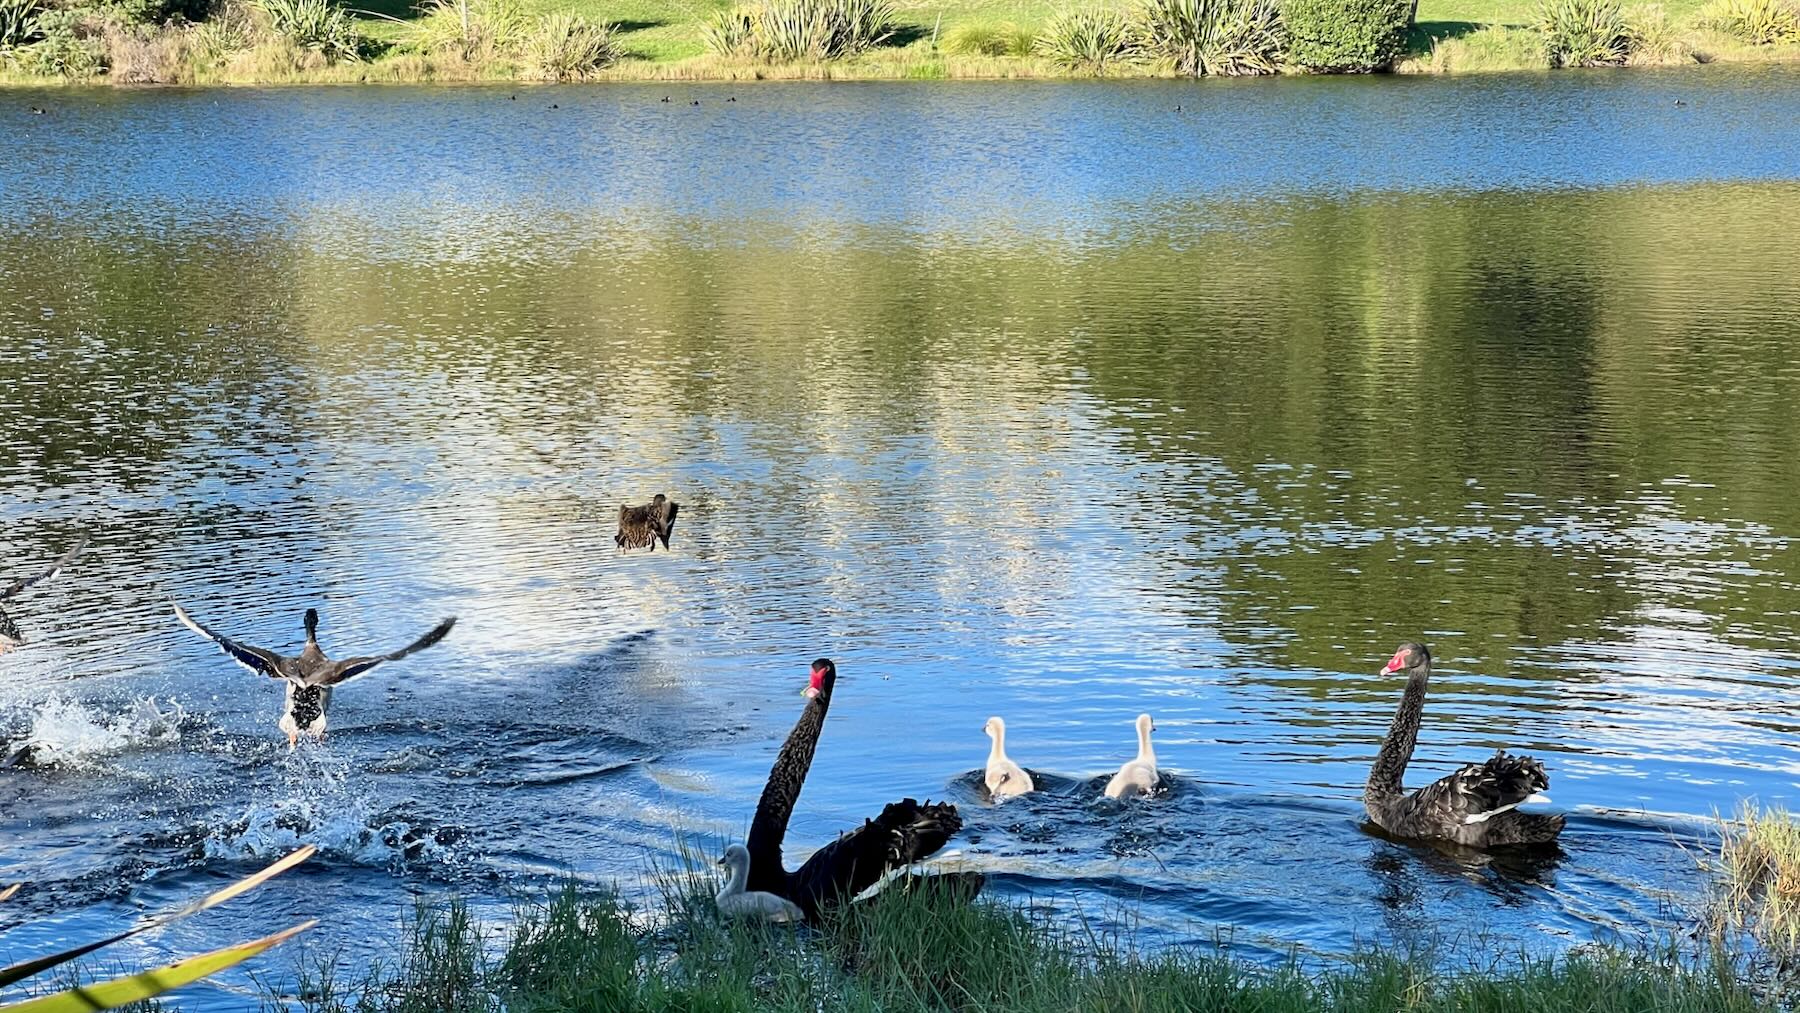 On a small lake, black swans with cygnets, adults with necks craned, and a mallard duck flying splashily away. 